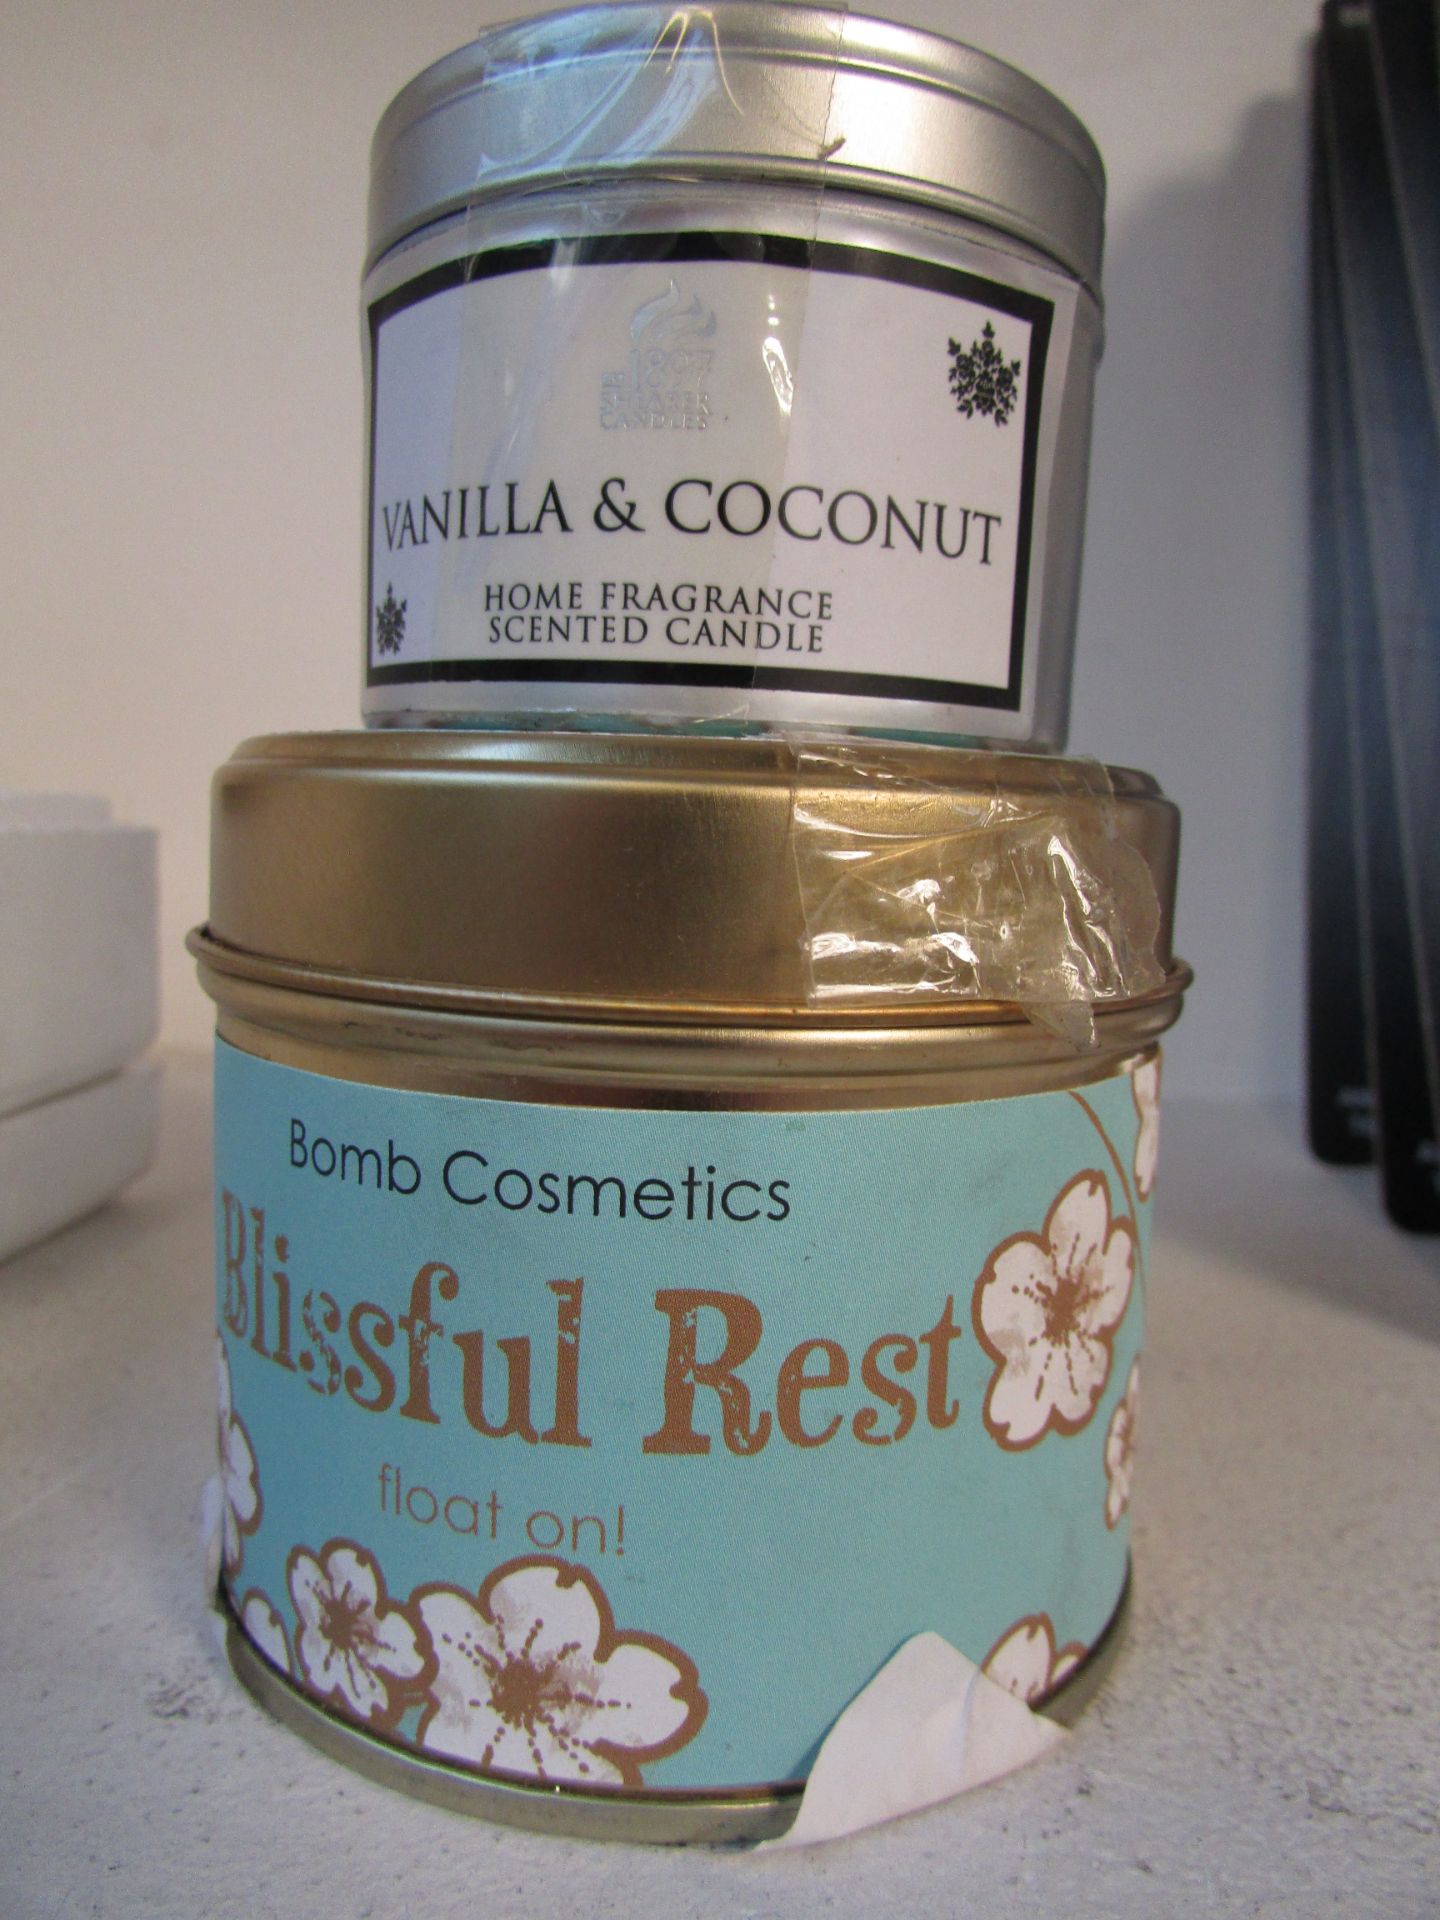 Vanilla & Coconut Candle And Blissful Rest Candle